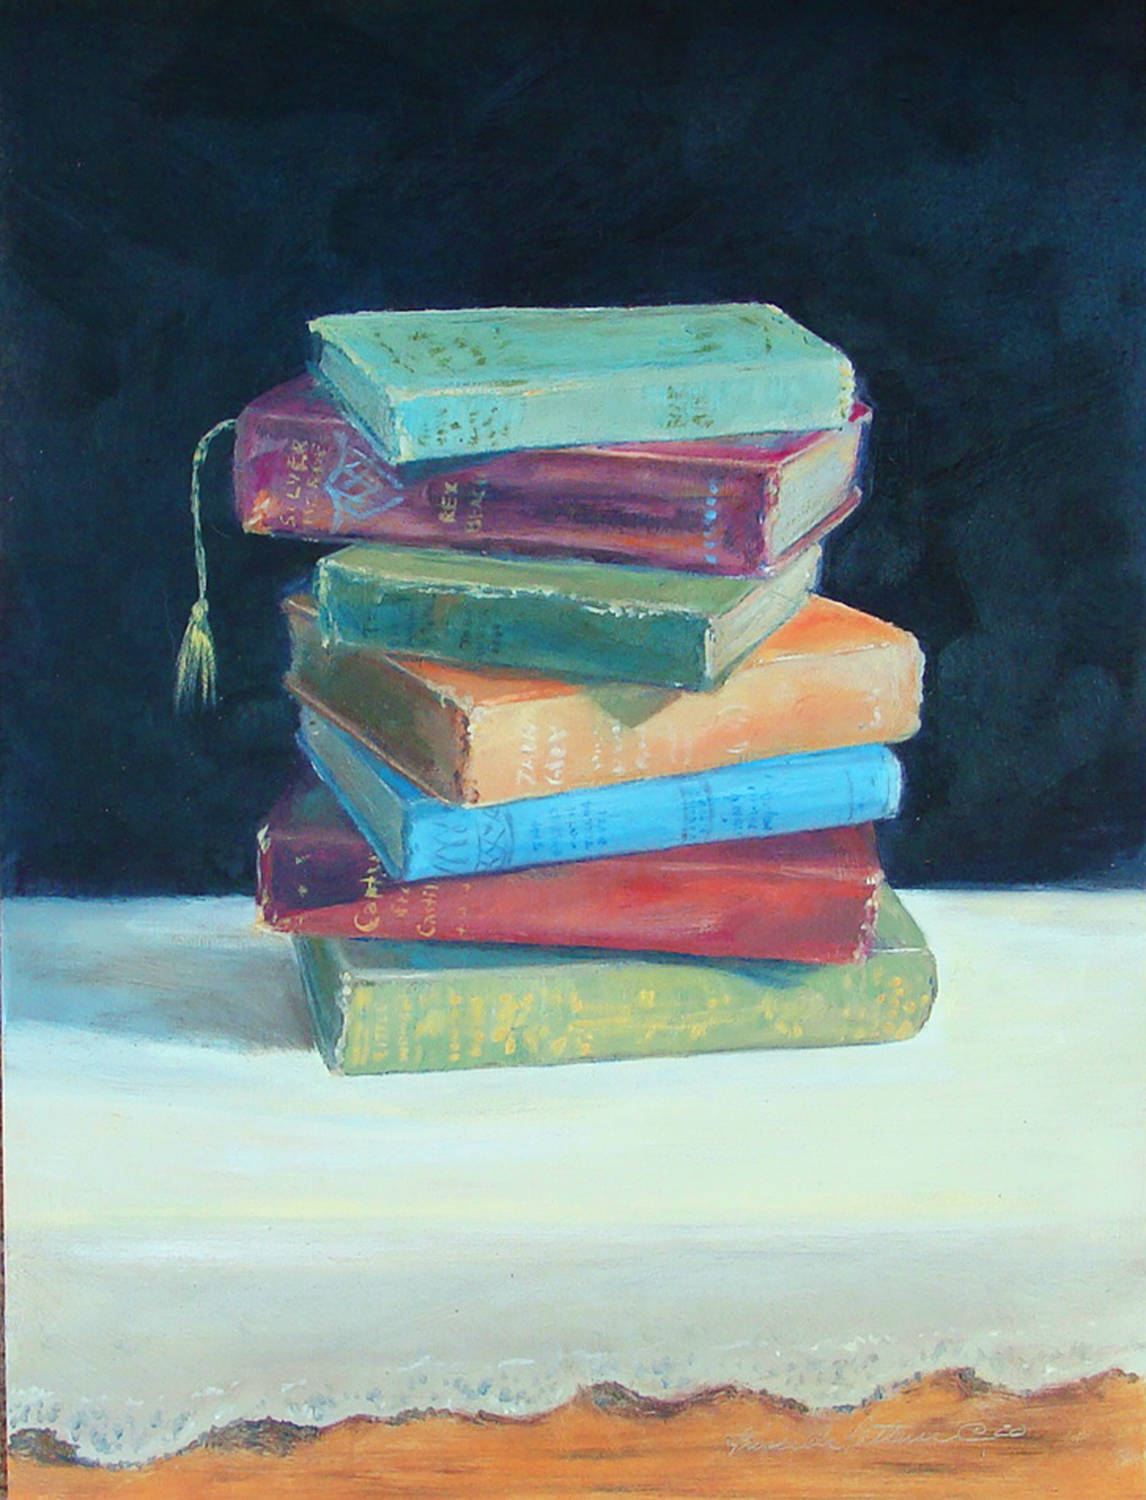 “While we stayed home, we read a lot of books” by Priscilla Patterson, a featured artist at the Blue Whole Gallery in September. Submitted art